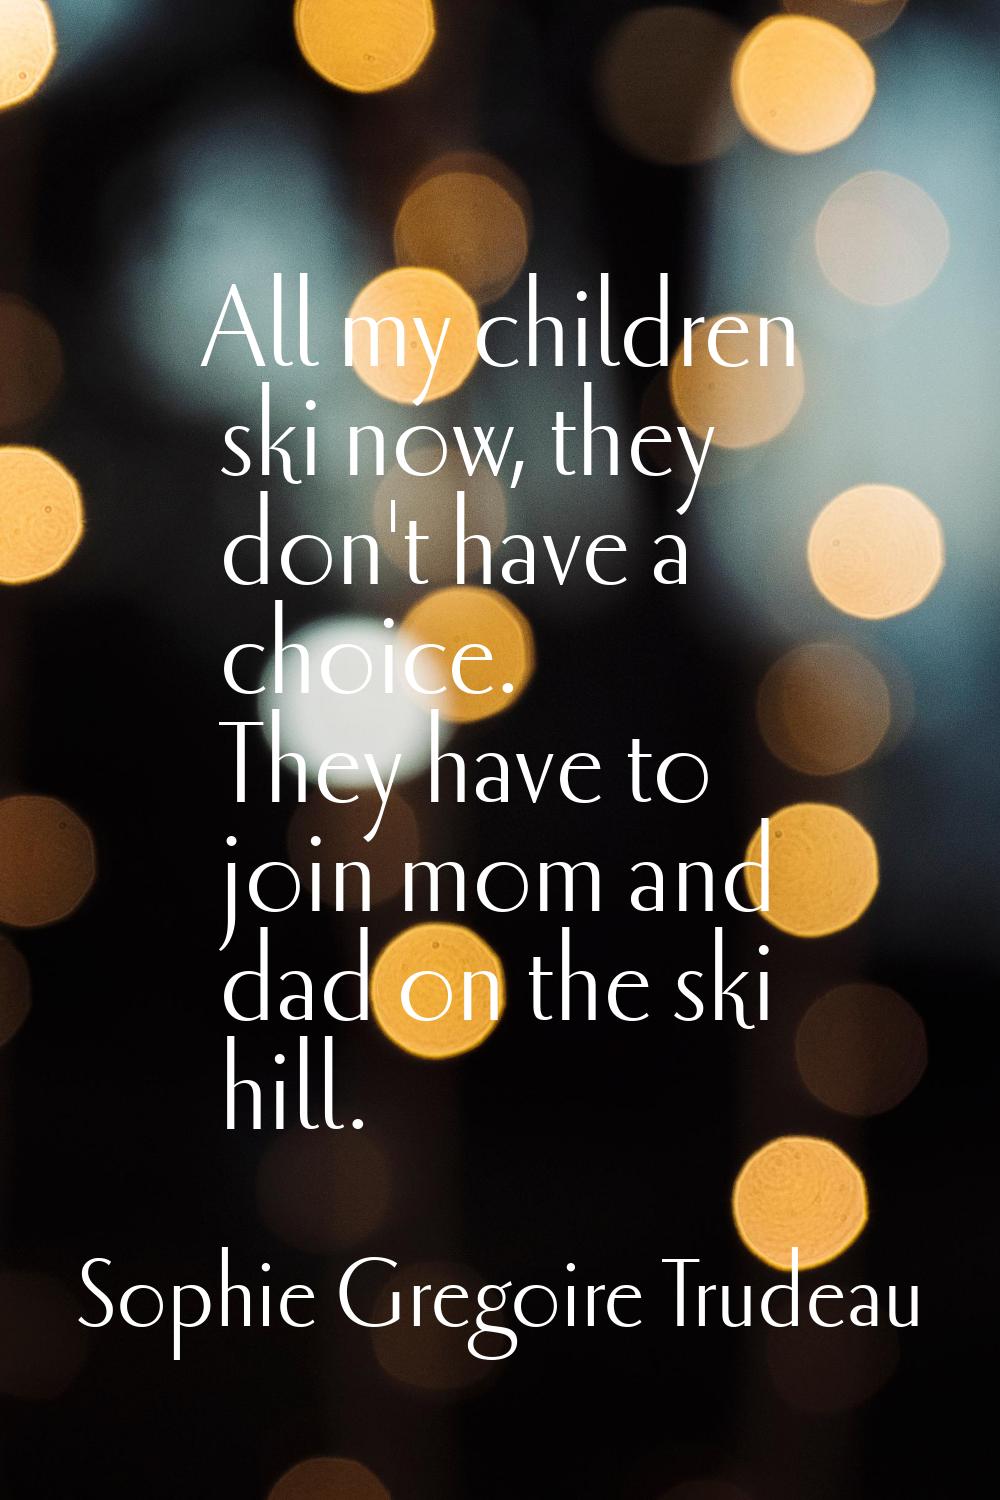 All my children ski now, they don't have a choice. They have to join mom and dad on the ski hill.